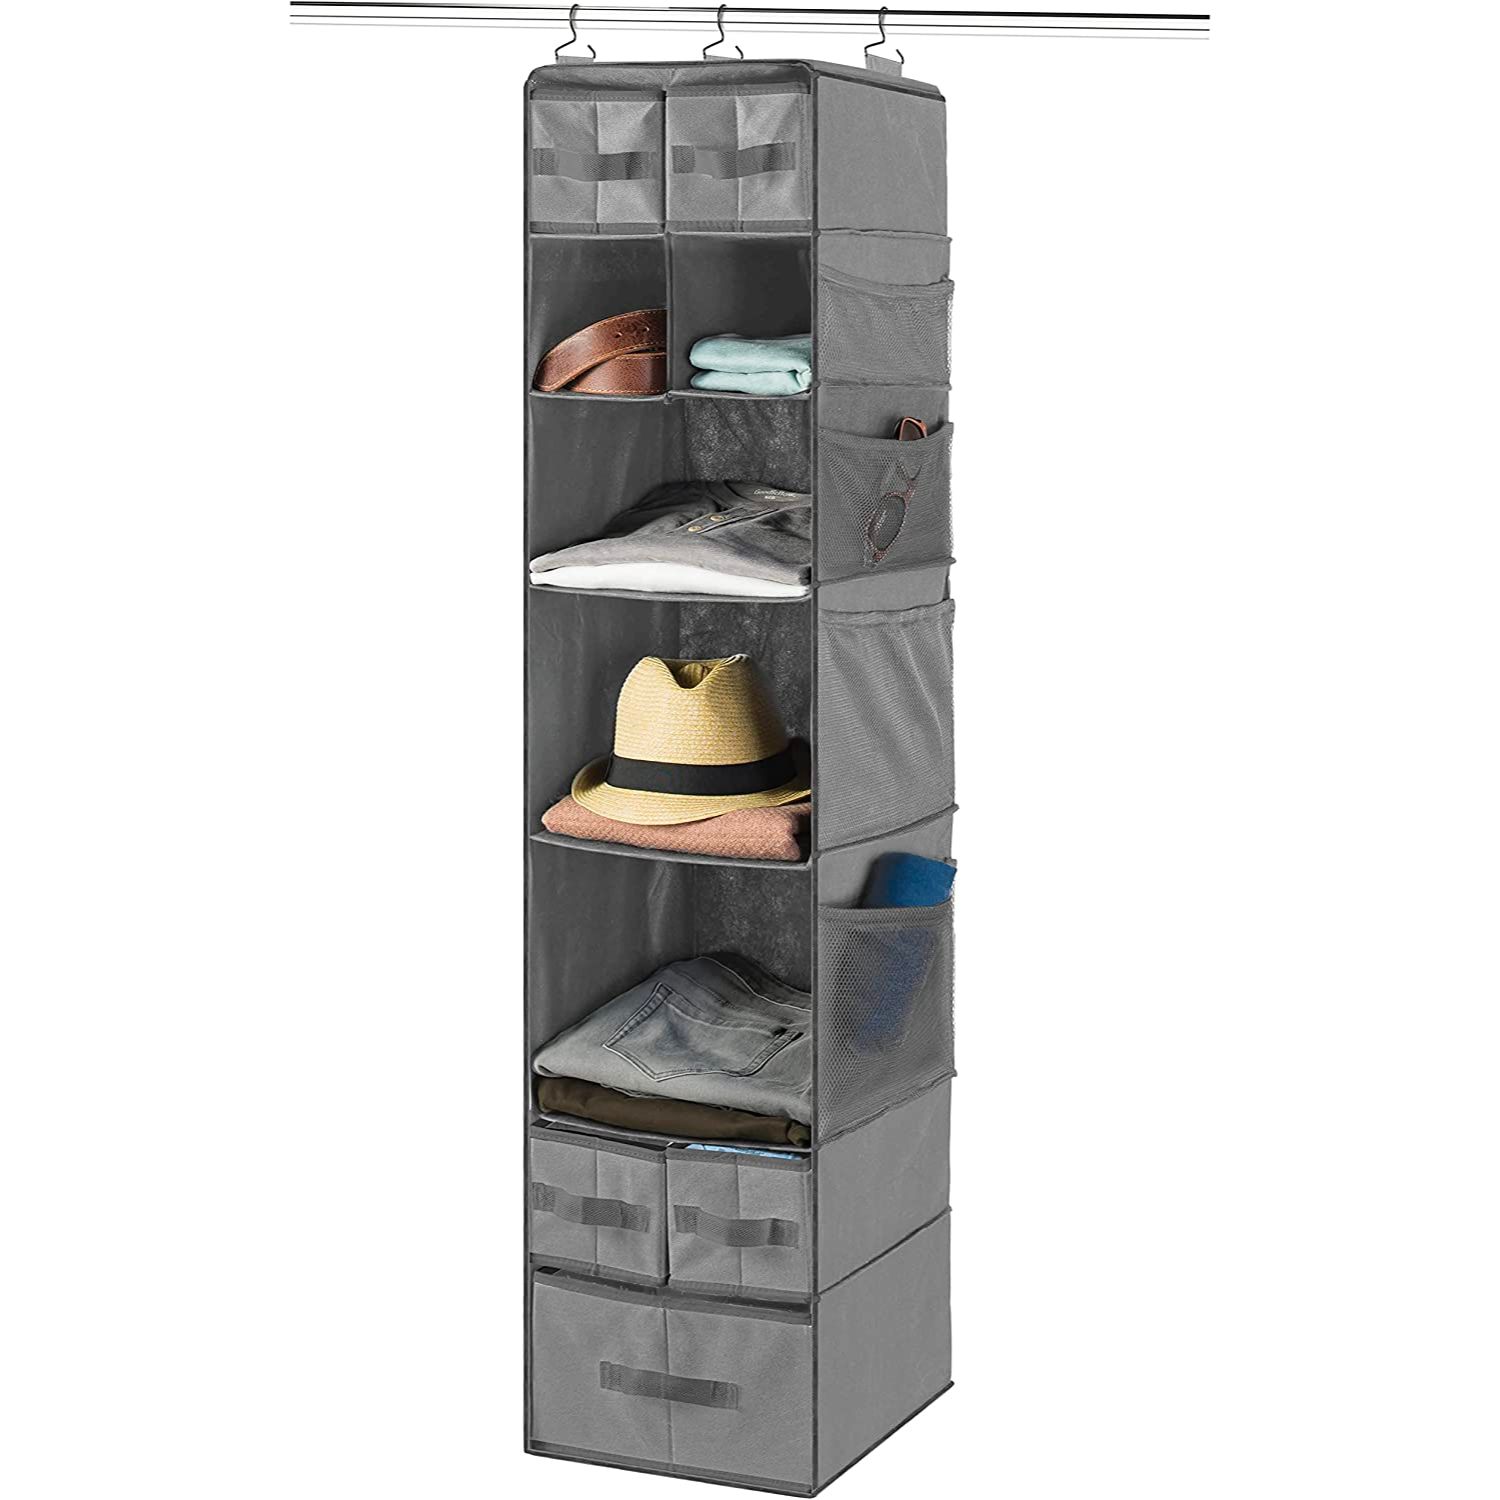 The Best Gifts for College Students: Hanging Closet Organizer